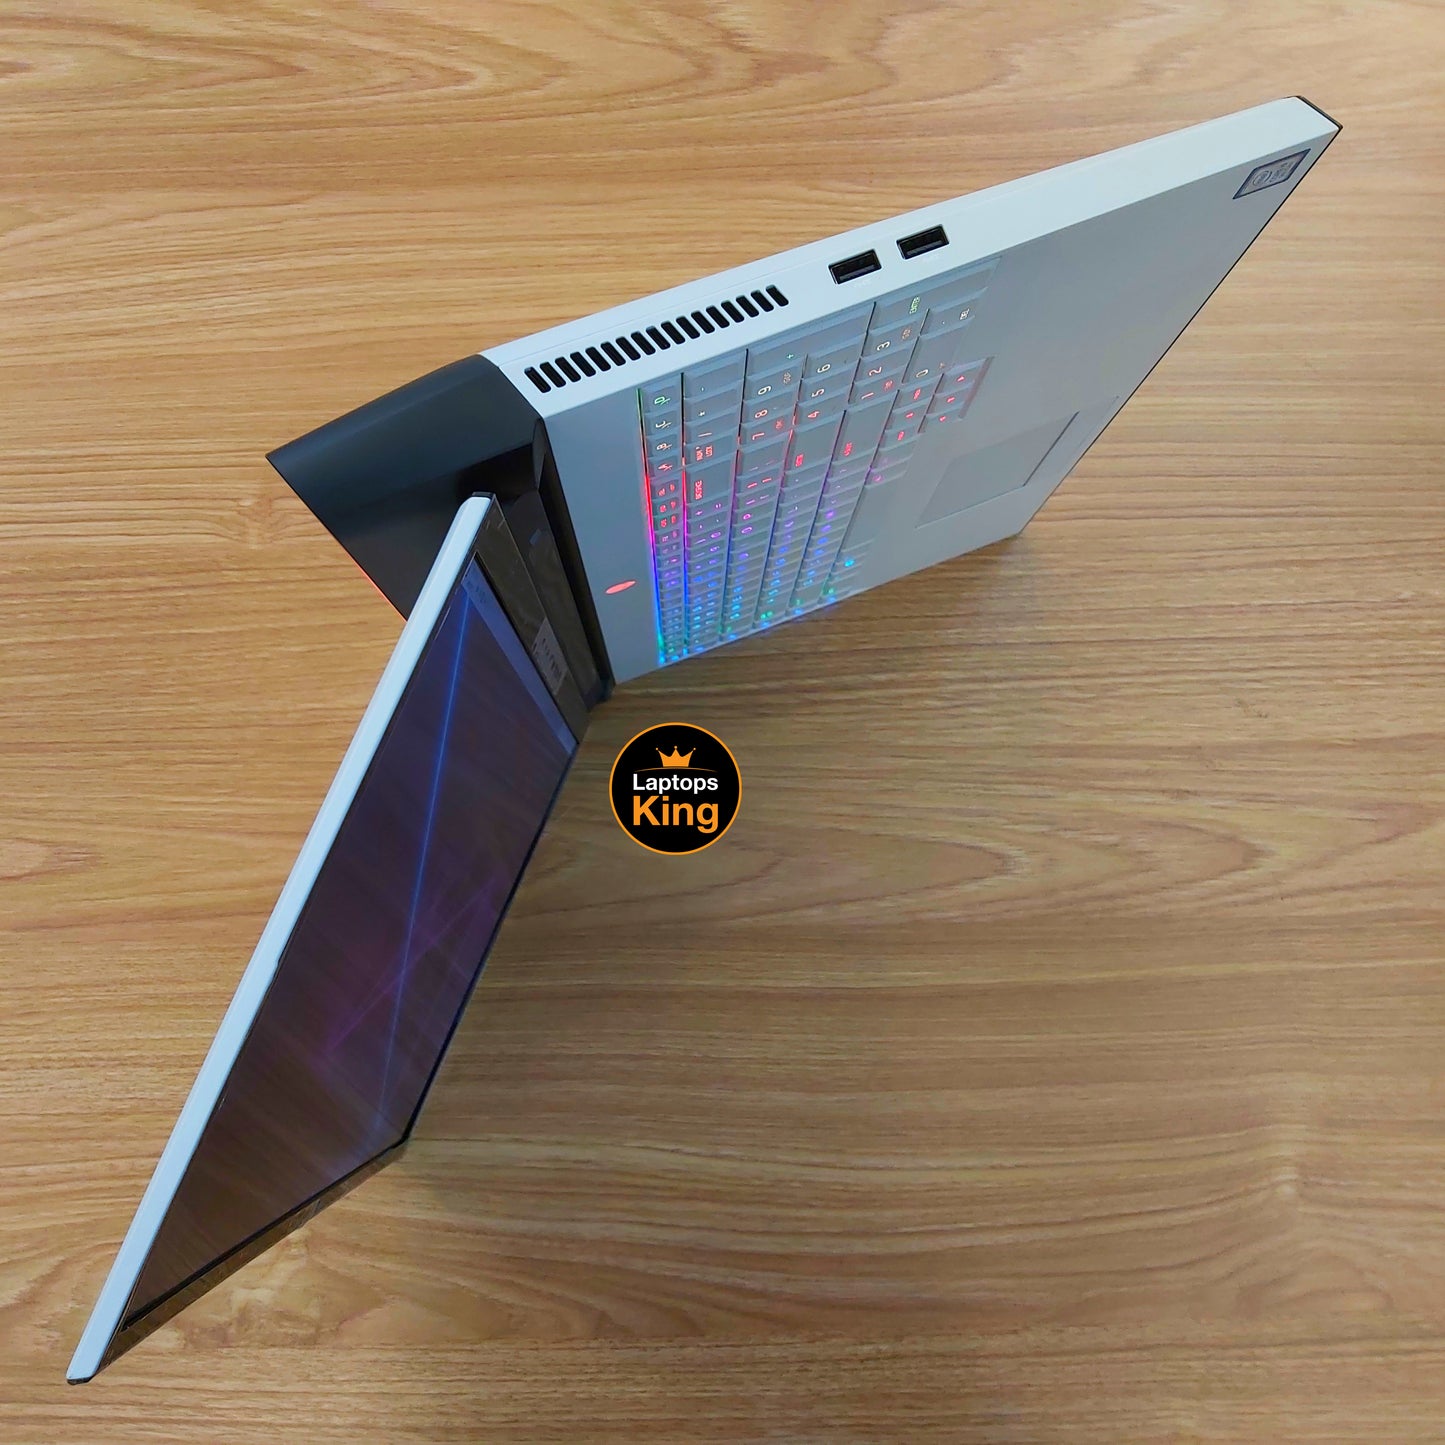 Alienware Area-51m i9-9900k RTX 2070 144hz Gaming Laptop (New Open Box) Gaming laptop, Graphic Design laptop, best laptop for gaming, best laptop for graphic design, computer for sale Lebanon, laptop for video editing in Lebanon, laptop for sale Lebanon, best graphic design laptop,	best video editing laptop, best programming laptop, laptop for sale in Lebanon, laptops for sale in Lebanon, laptop for sale in Lebanon, buy computer Lebanon, buy laptop Lebanon.